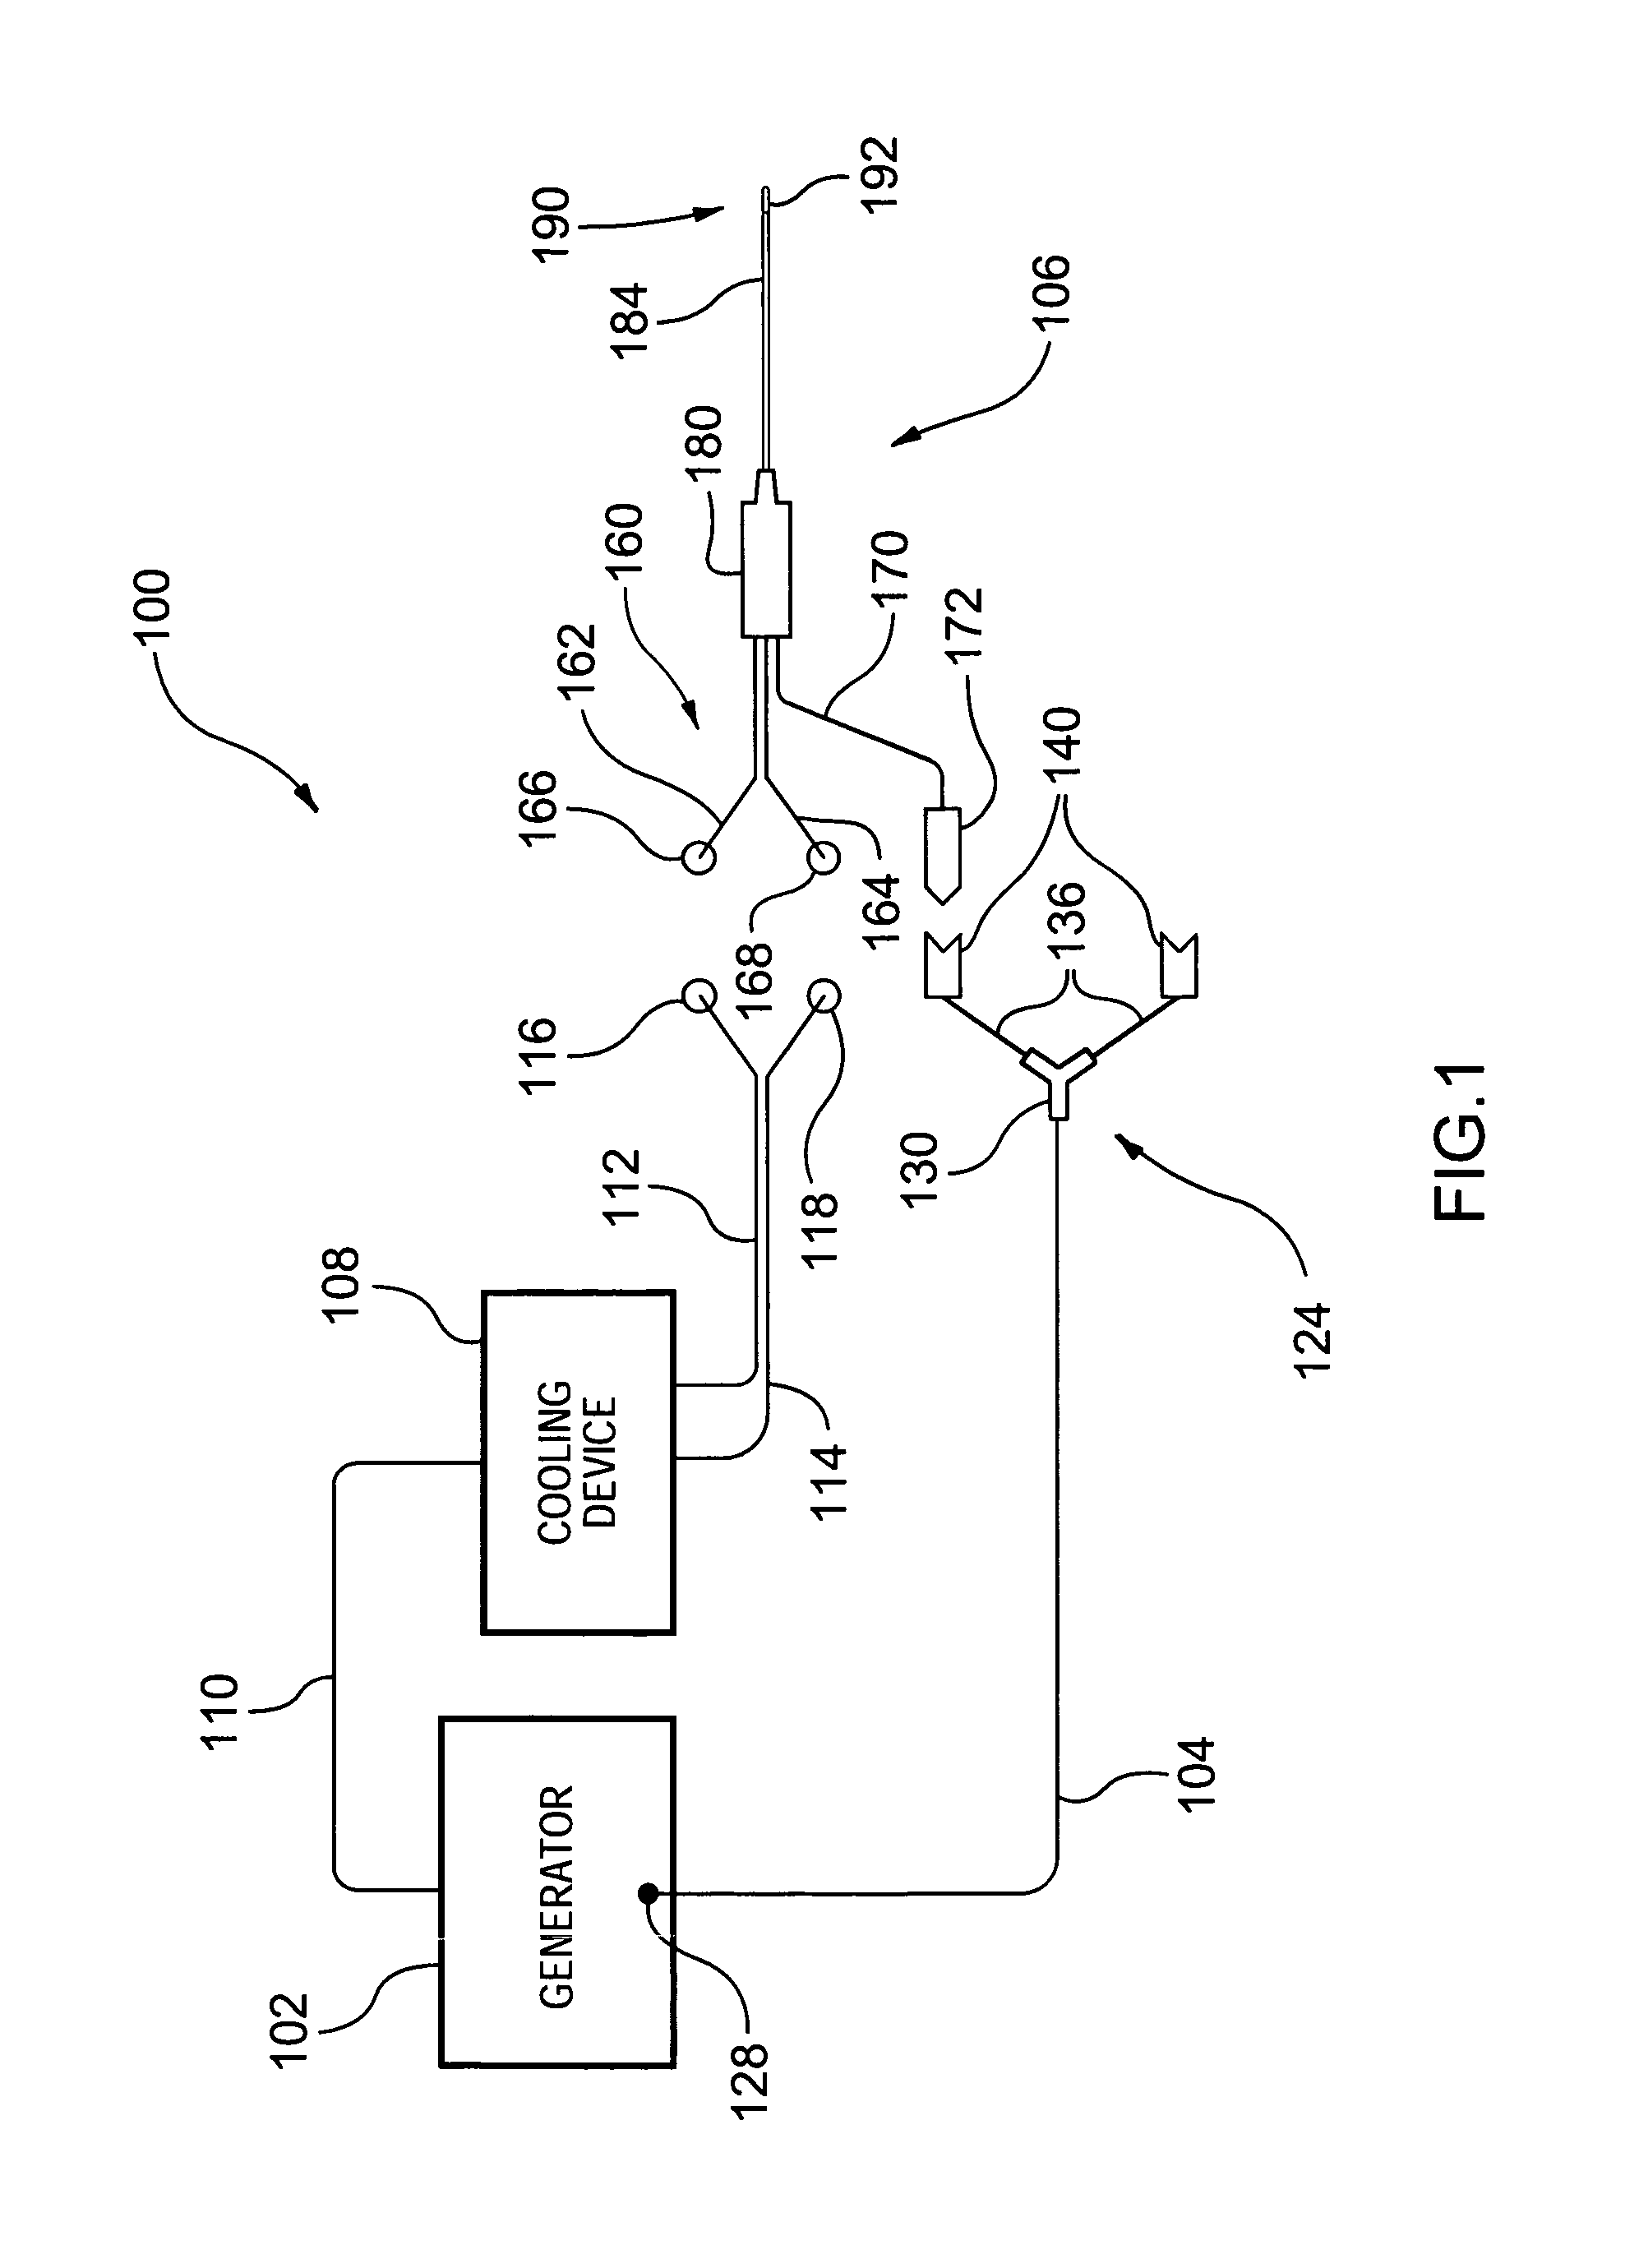 Electrosurgical device for treatment of tissue